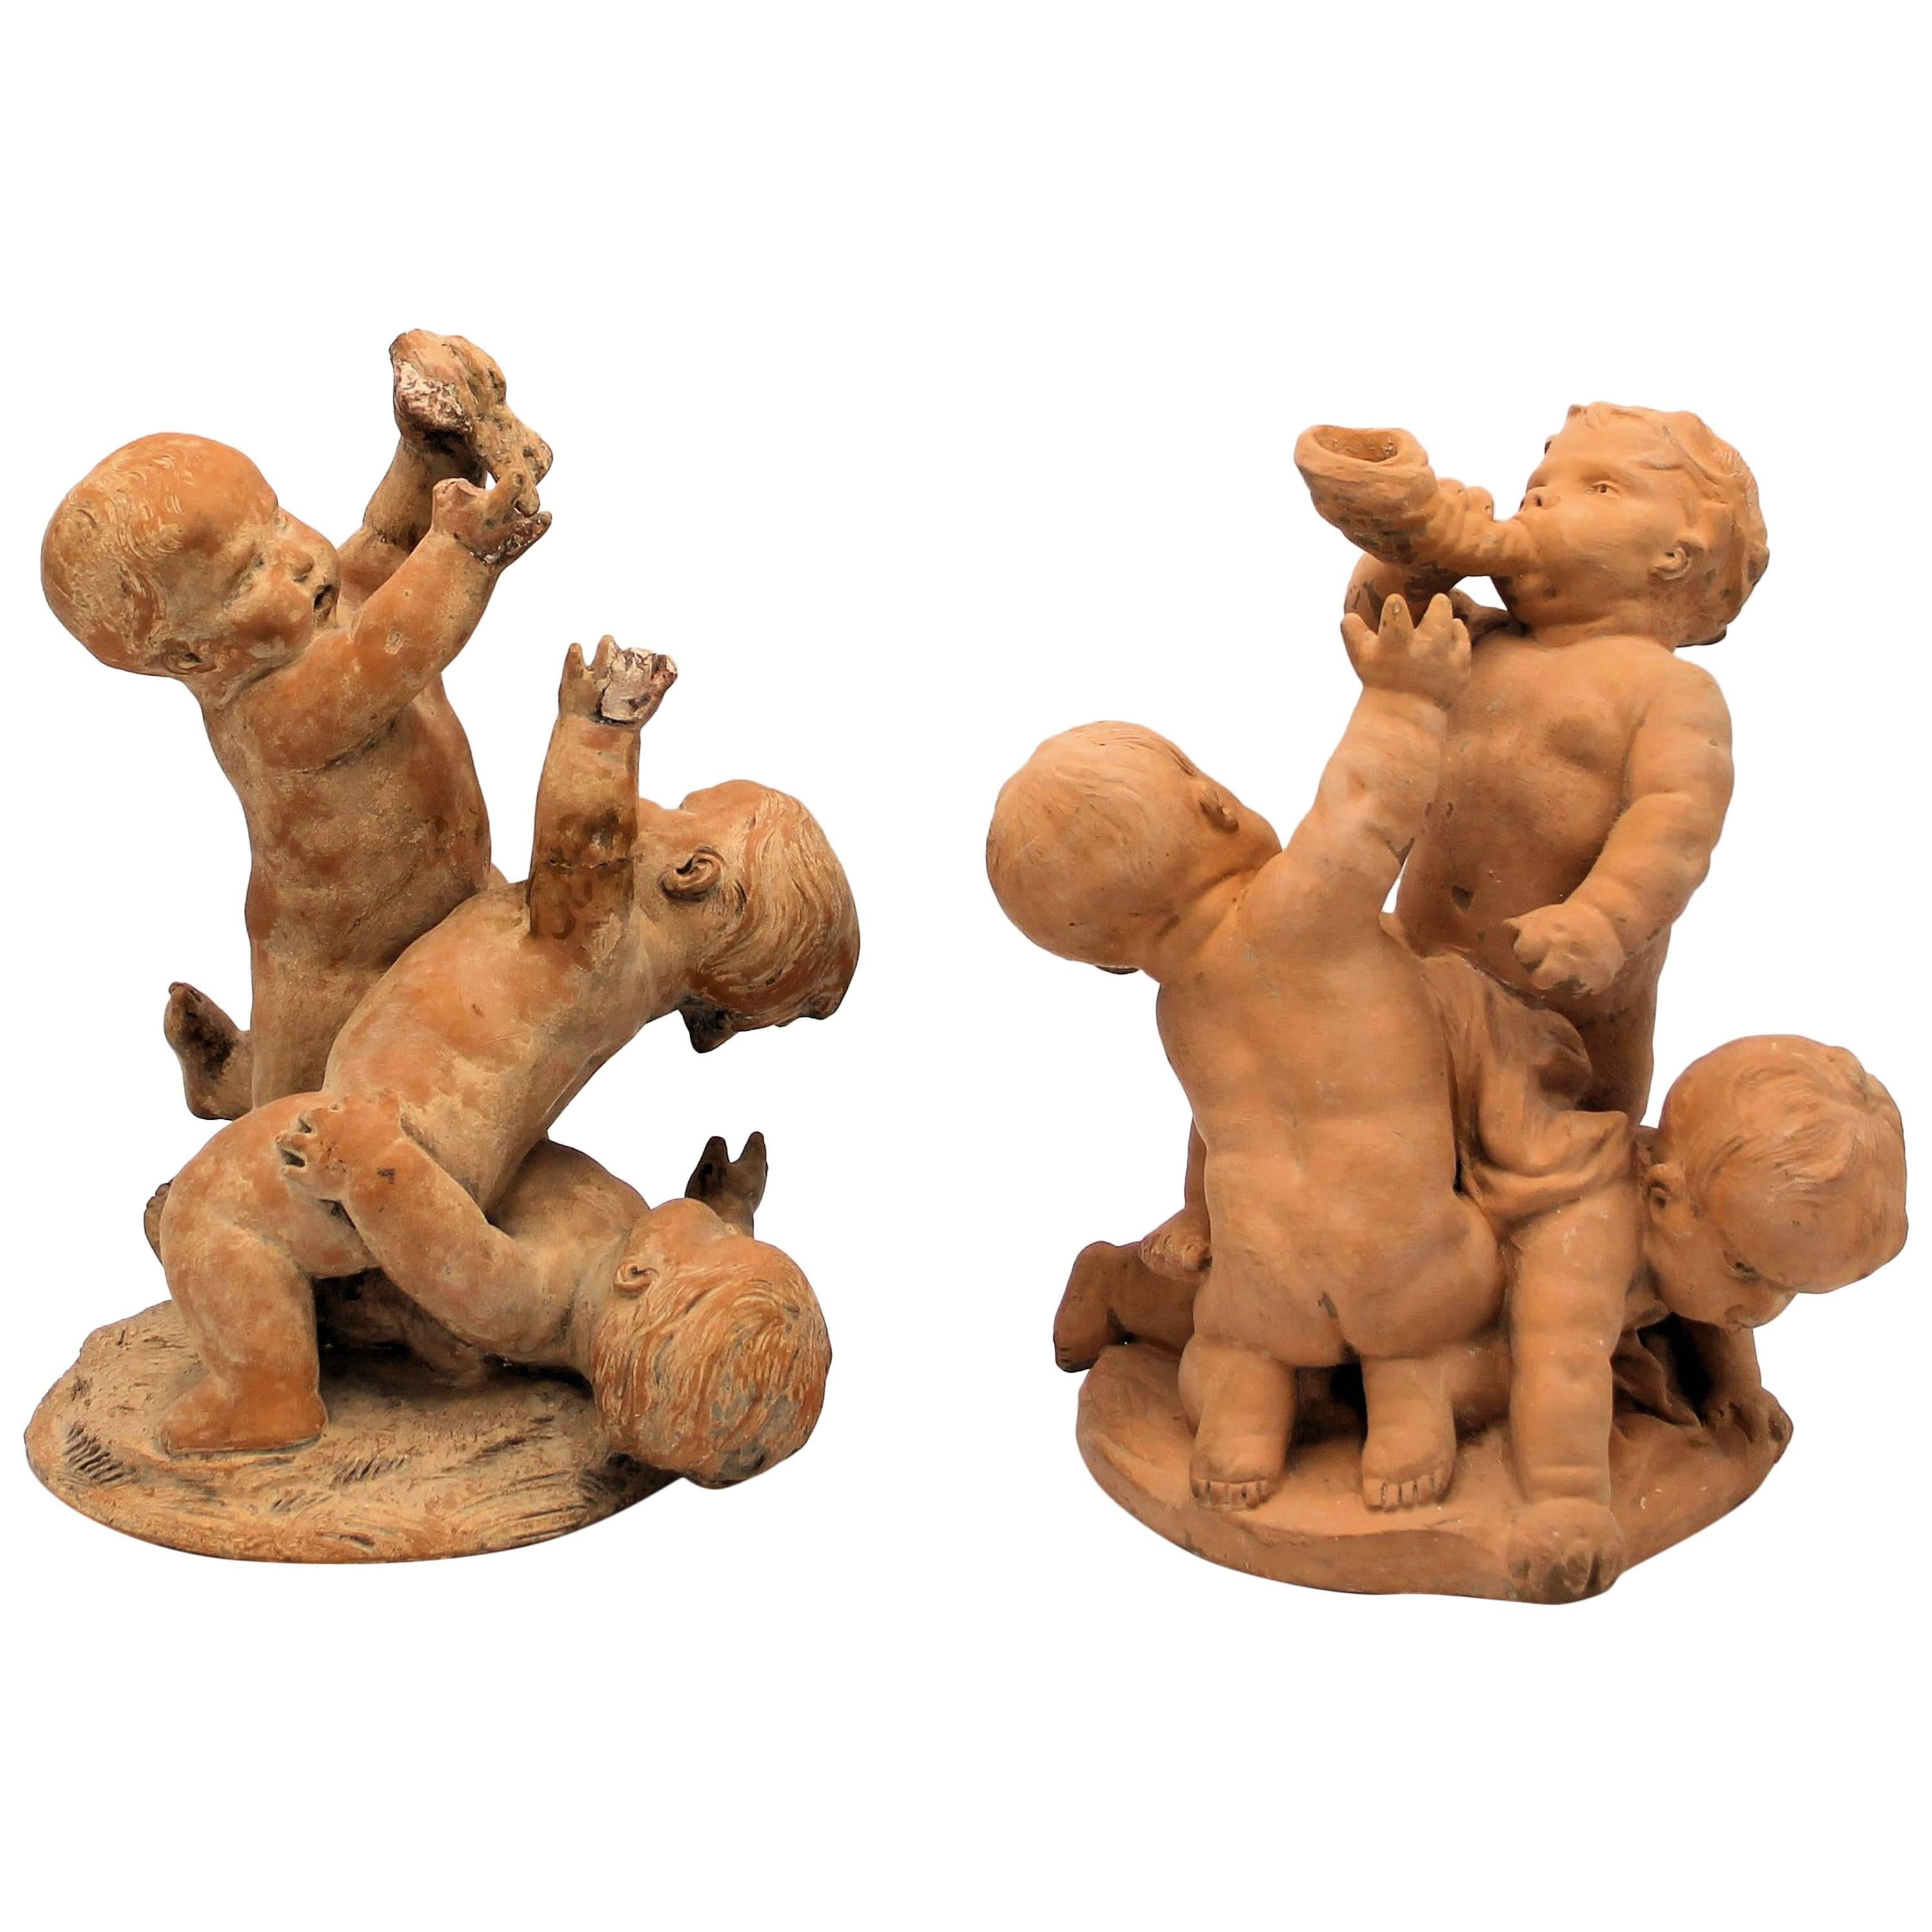 Edme Samson, Pair of Terracotta Sculptures of Playing Putti For Sale